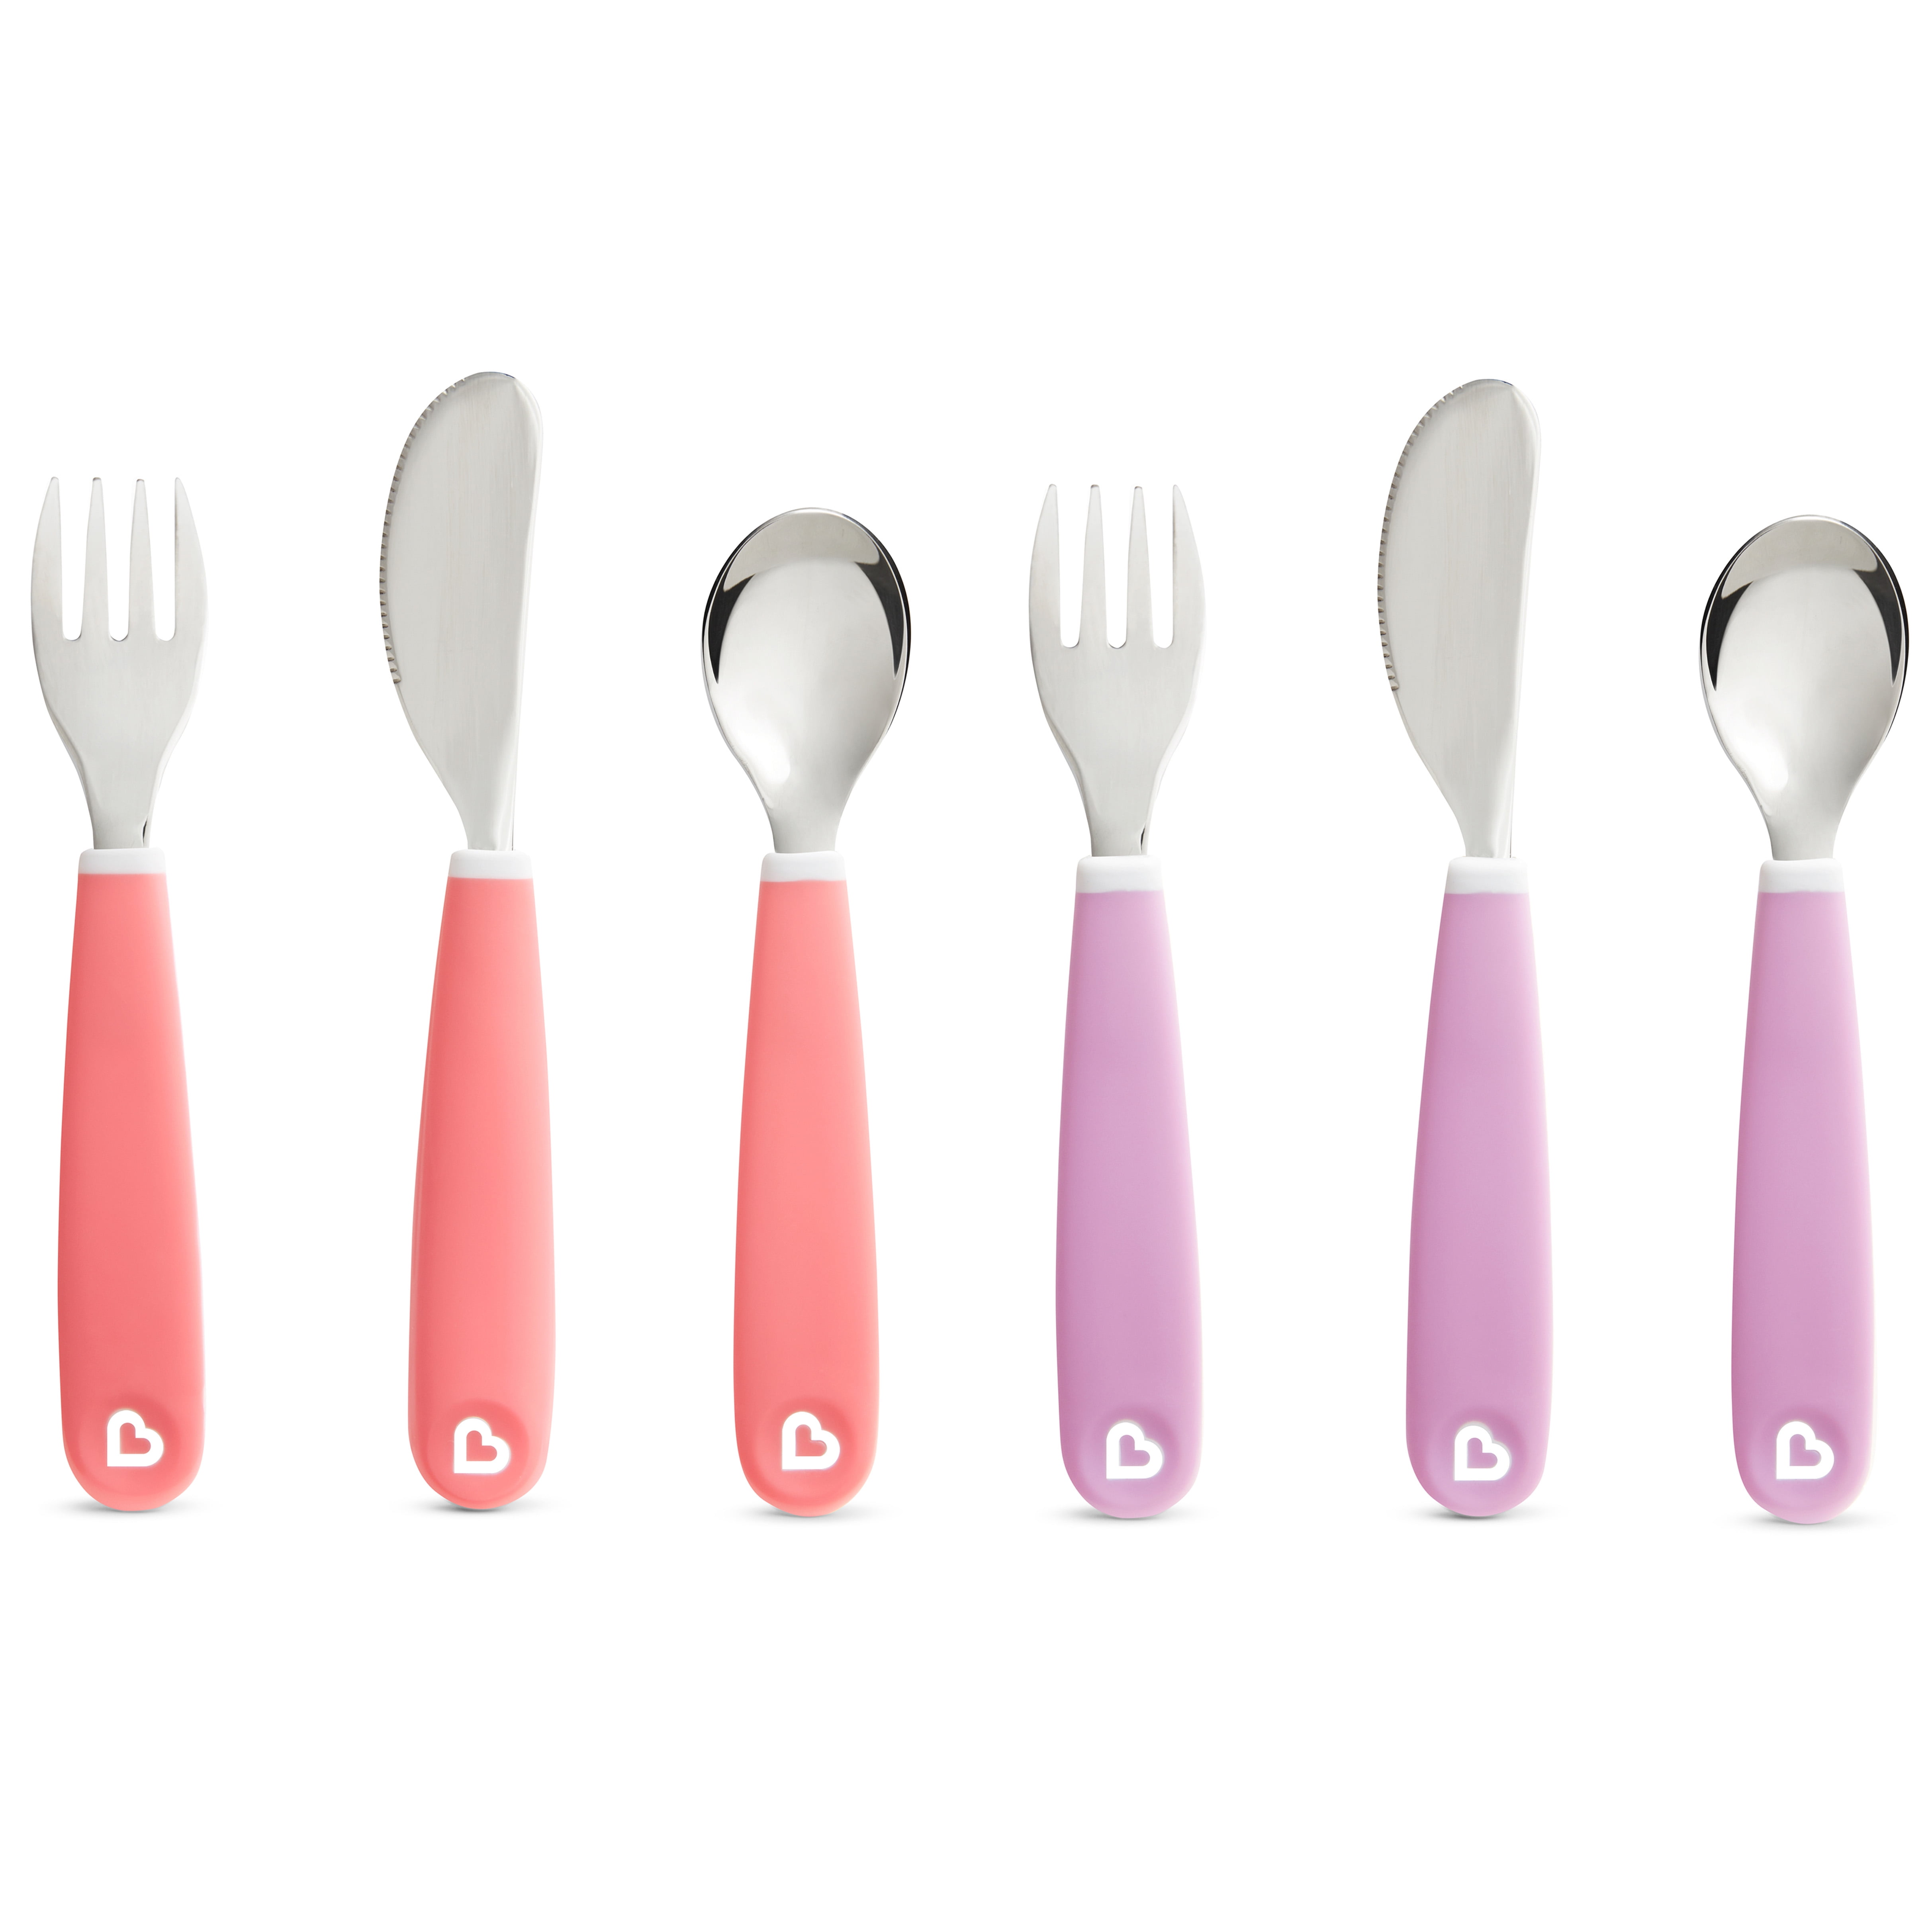 Toddler Spoon and Fork Template Set of 2 - The Spoon Crank